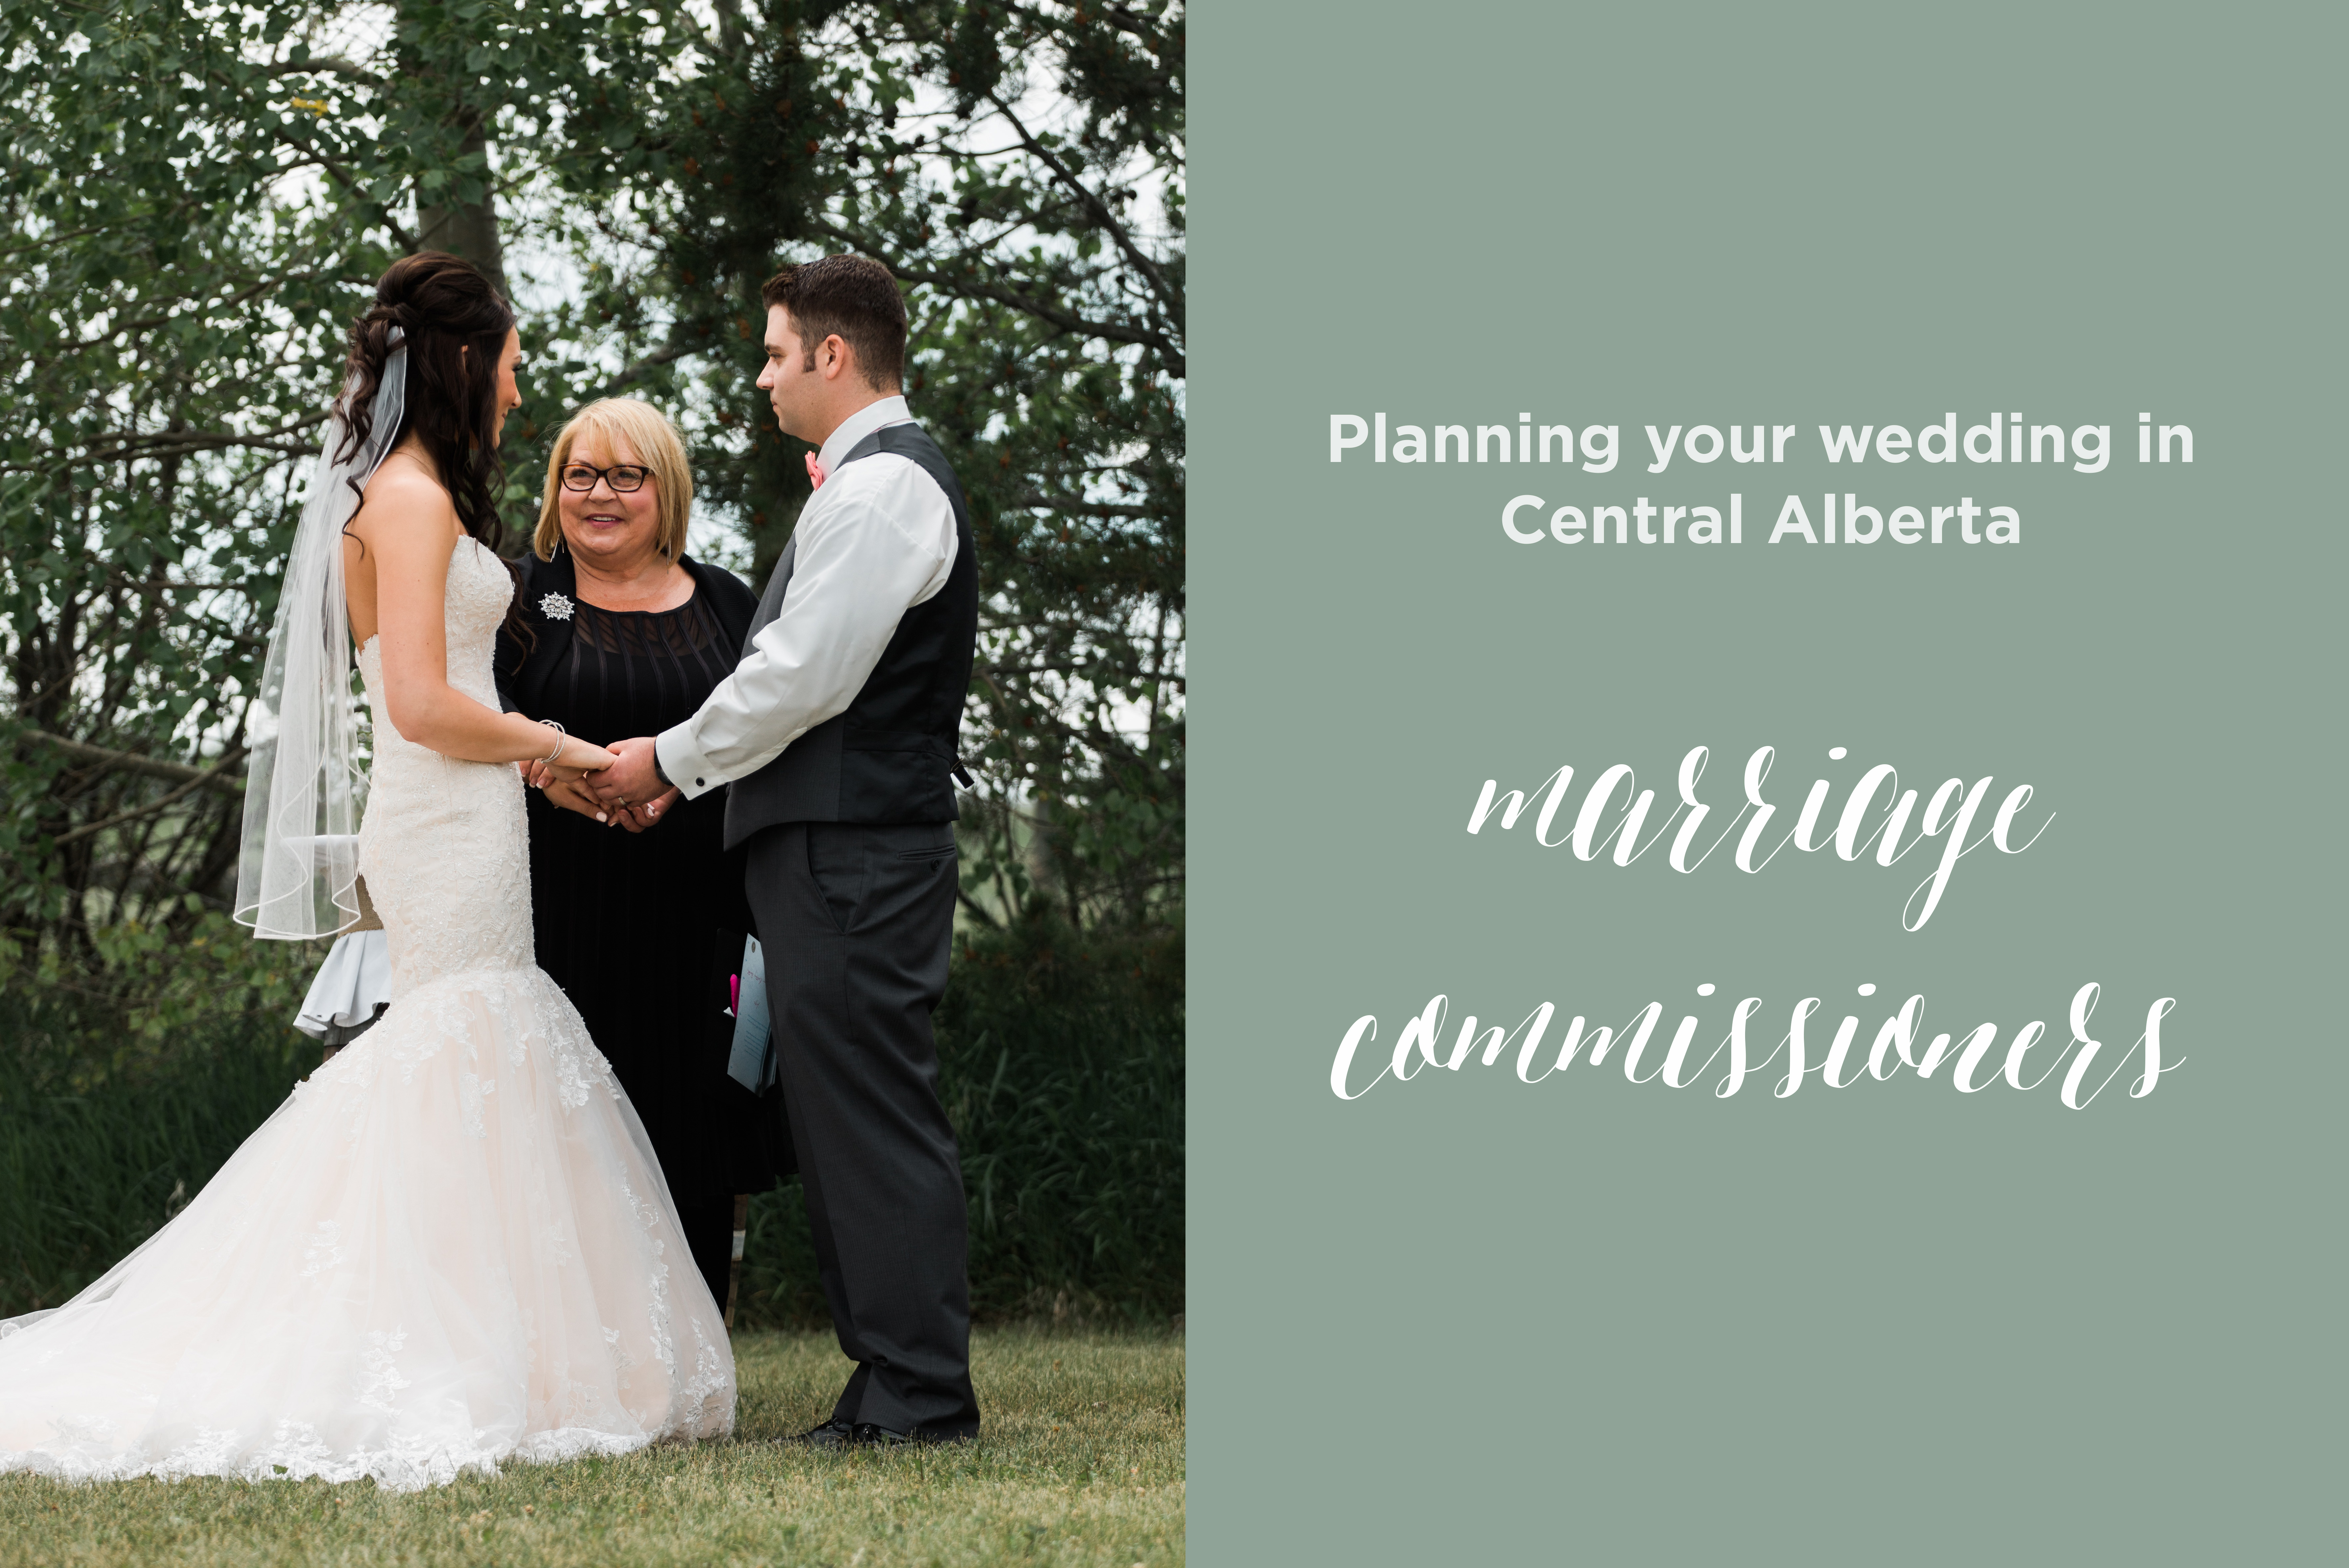 Planning a wedding in Central Alberta | red Deer Photographers | Marriage commissioners in Central Alberta